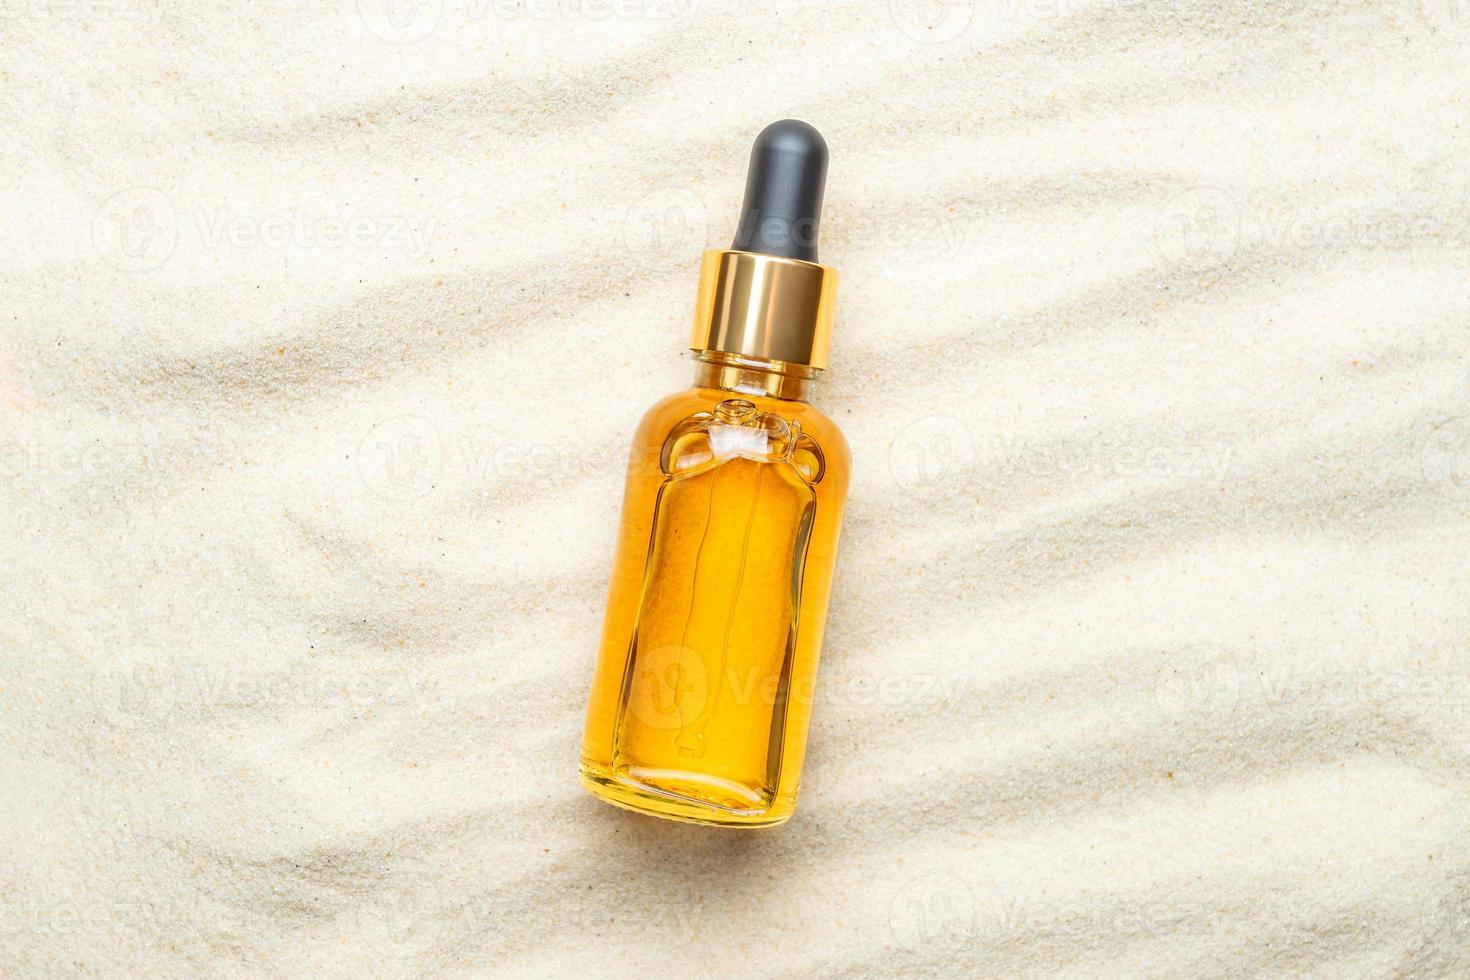 Skincare with beauty cosmetic face serum. Glass bottle with a pipette on a natural sandy background. Essential oil or Vitamin C cerum for moisturizing body skin. Copy space photo